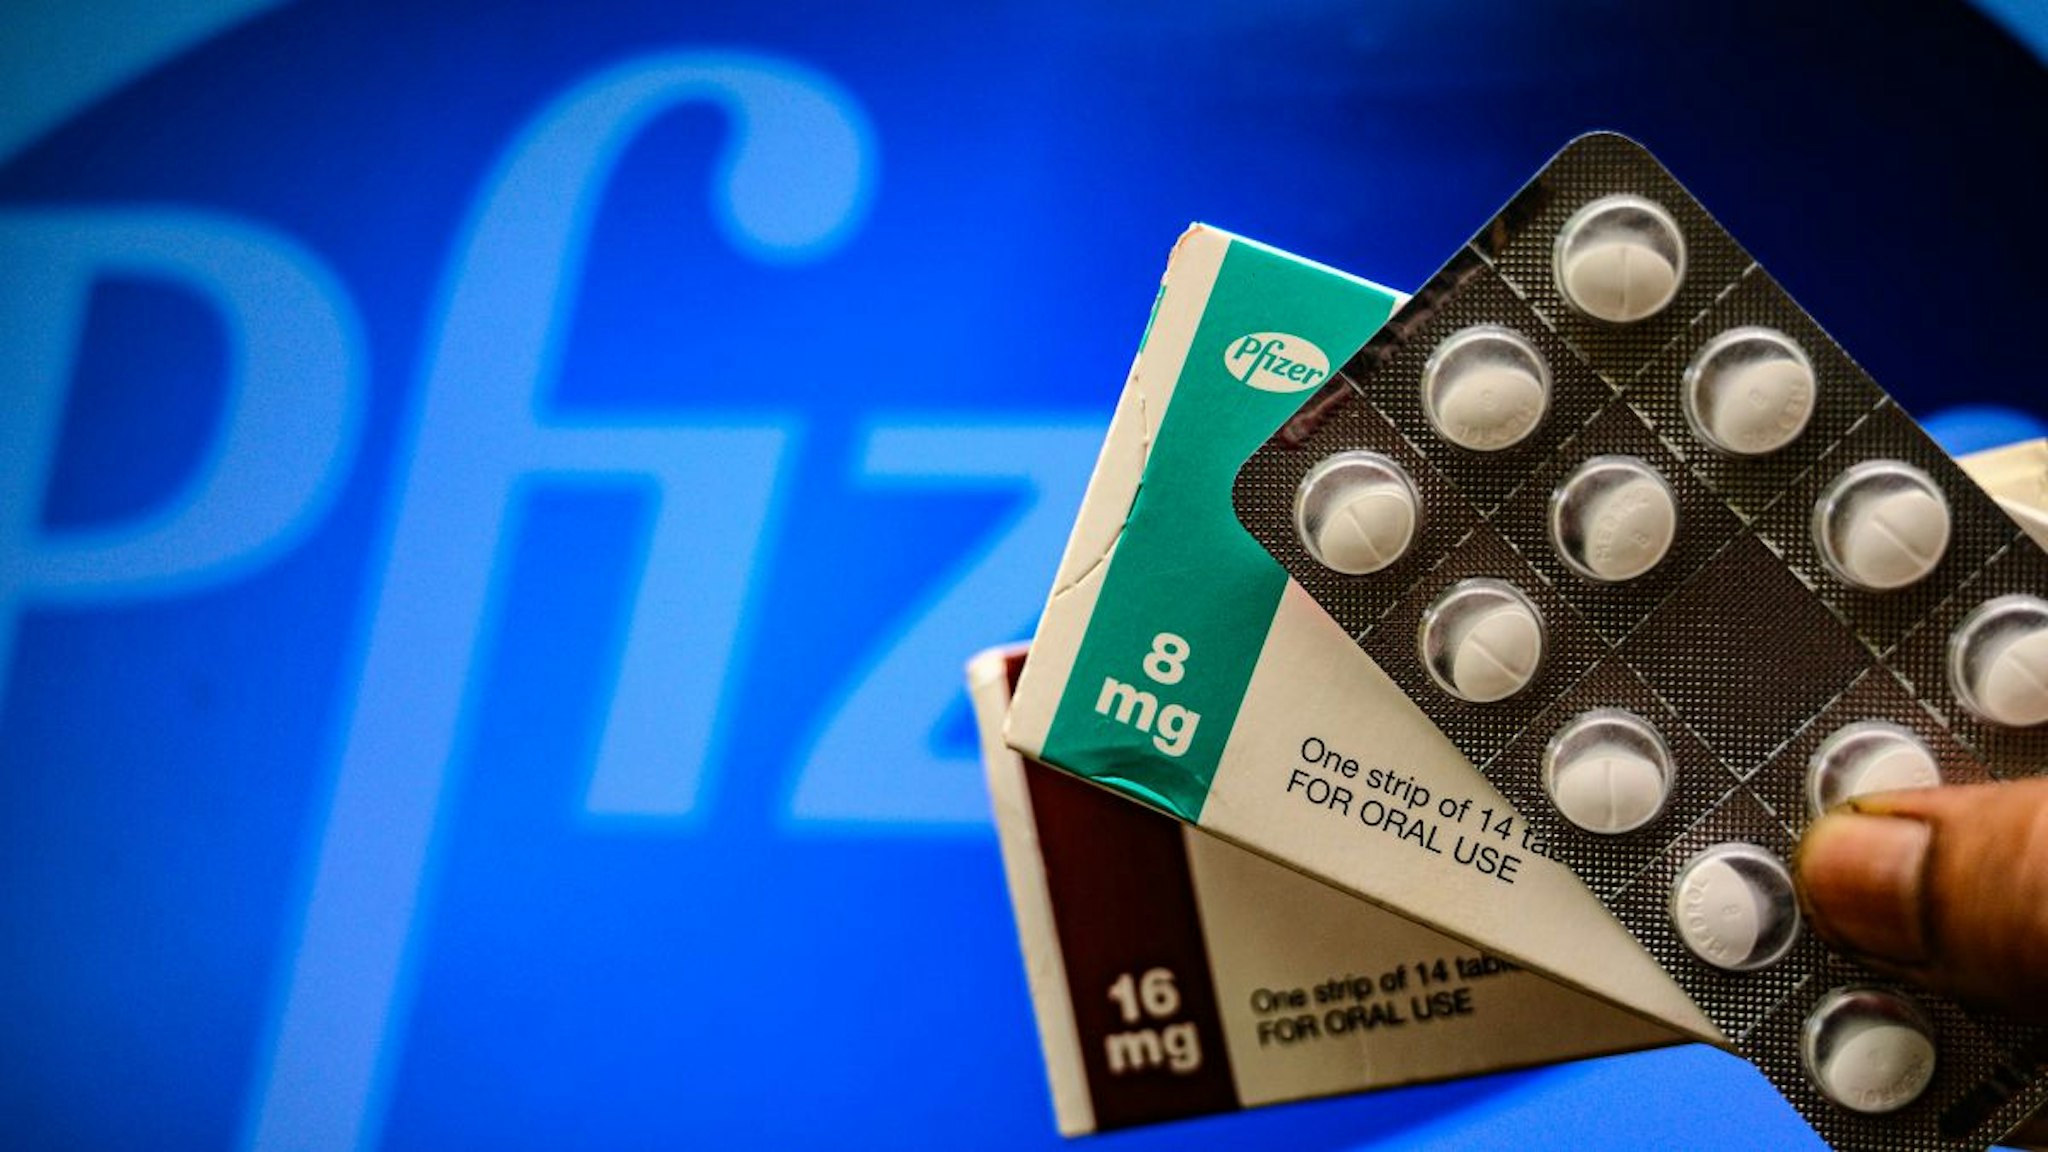 Medicine pills are seen with Pfizer logo in this illustration photo taken in Tehatta, West Bengal, India on 29 April 2021.